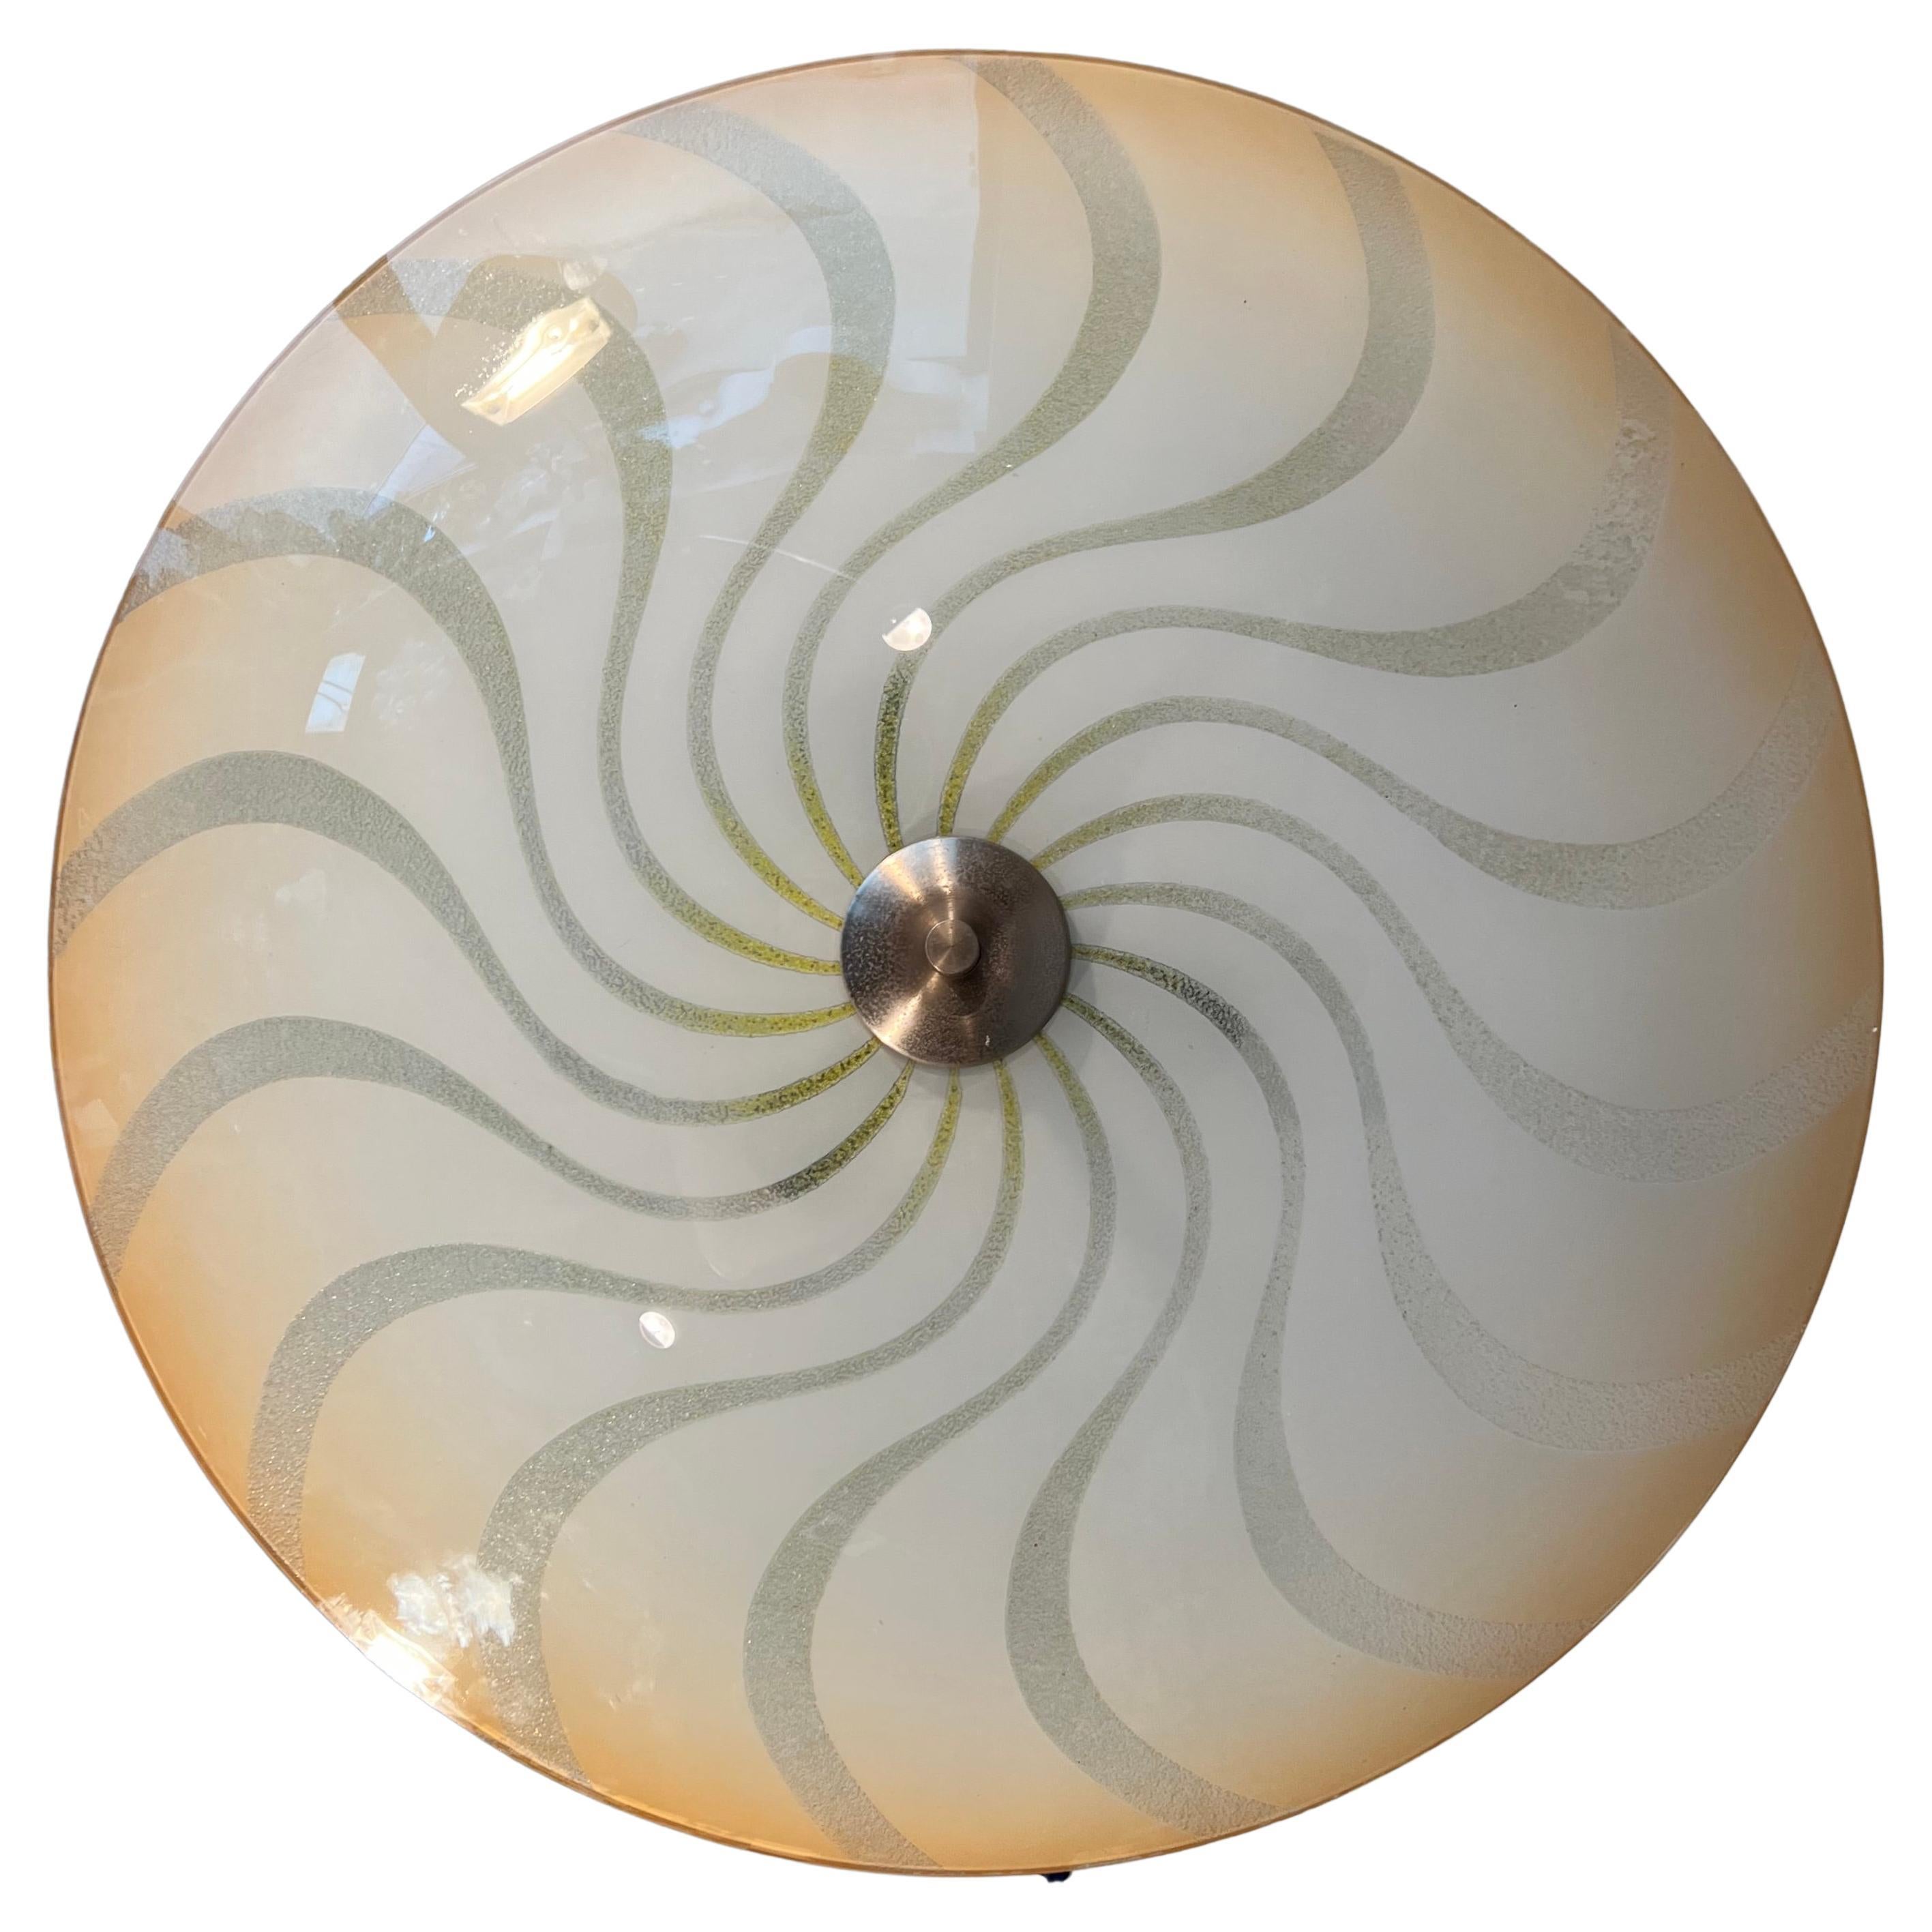 Beautiful shape AND materials flush mount from the Mid-Century Modern era.

This rare shape and large size flush mount has a stunning, glass shade with a striking, hurricane or vortex-like pattern. As you can see, the artistic and almost flat glass